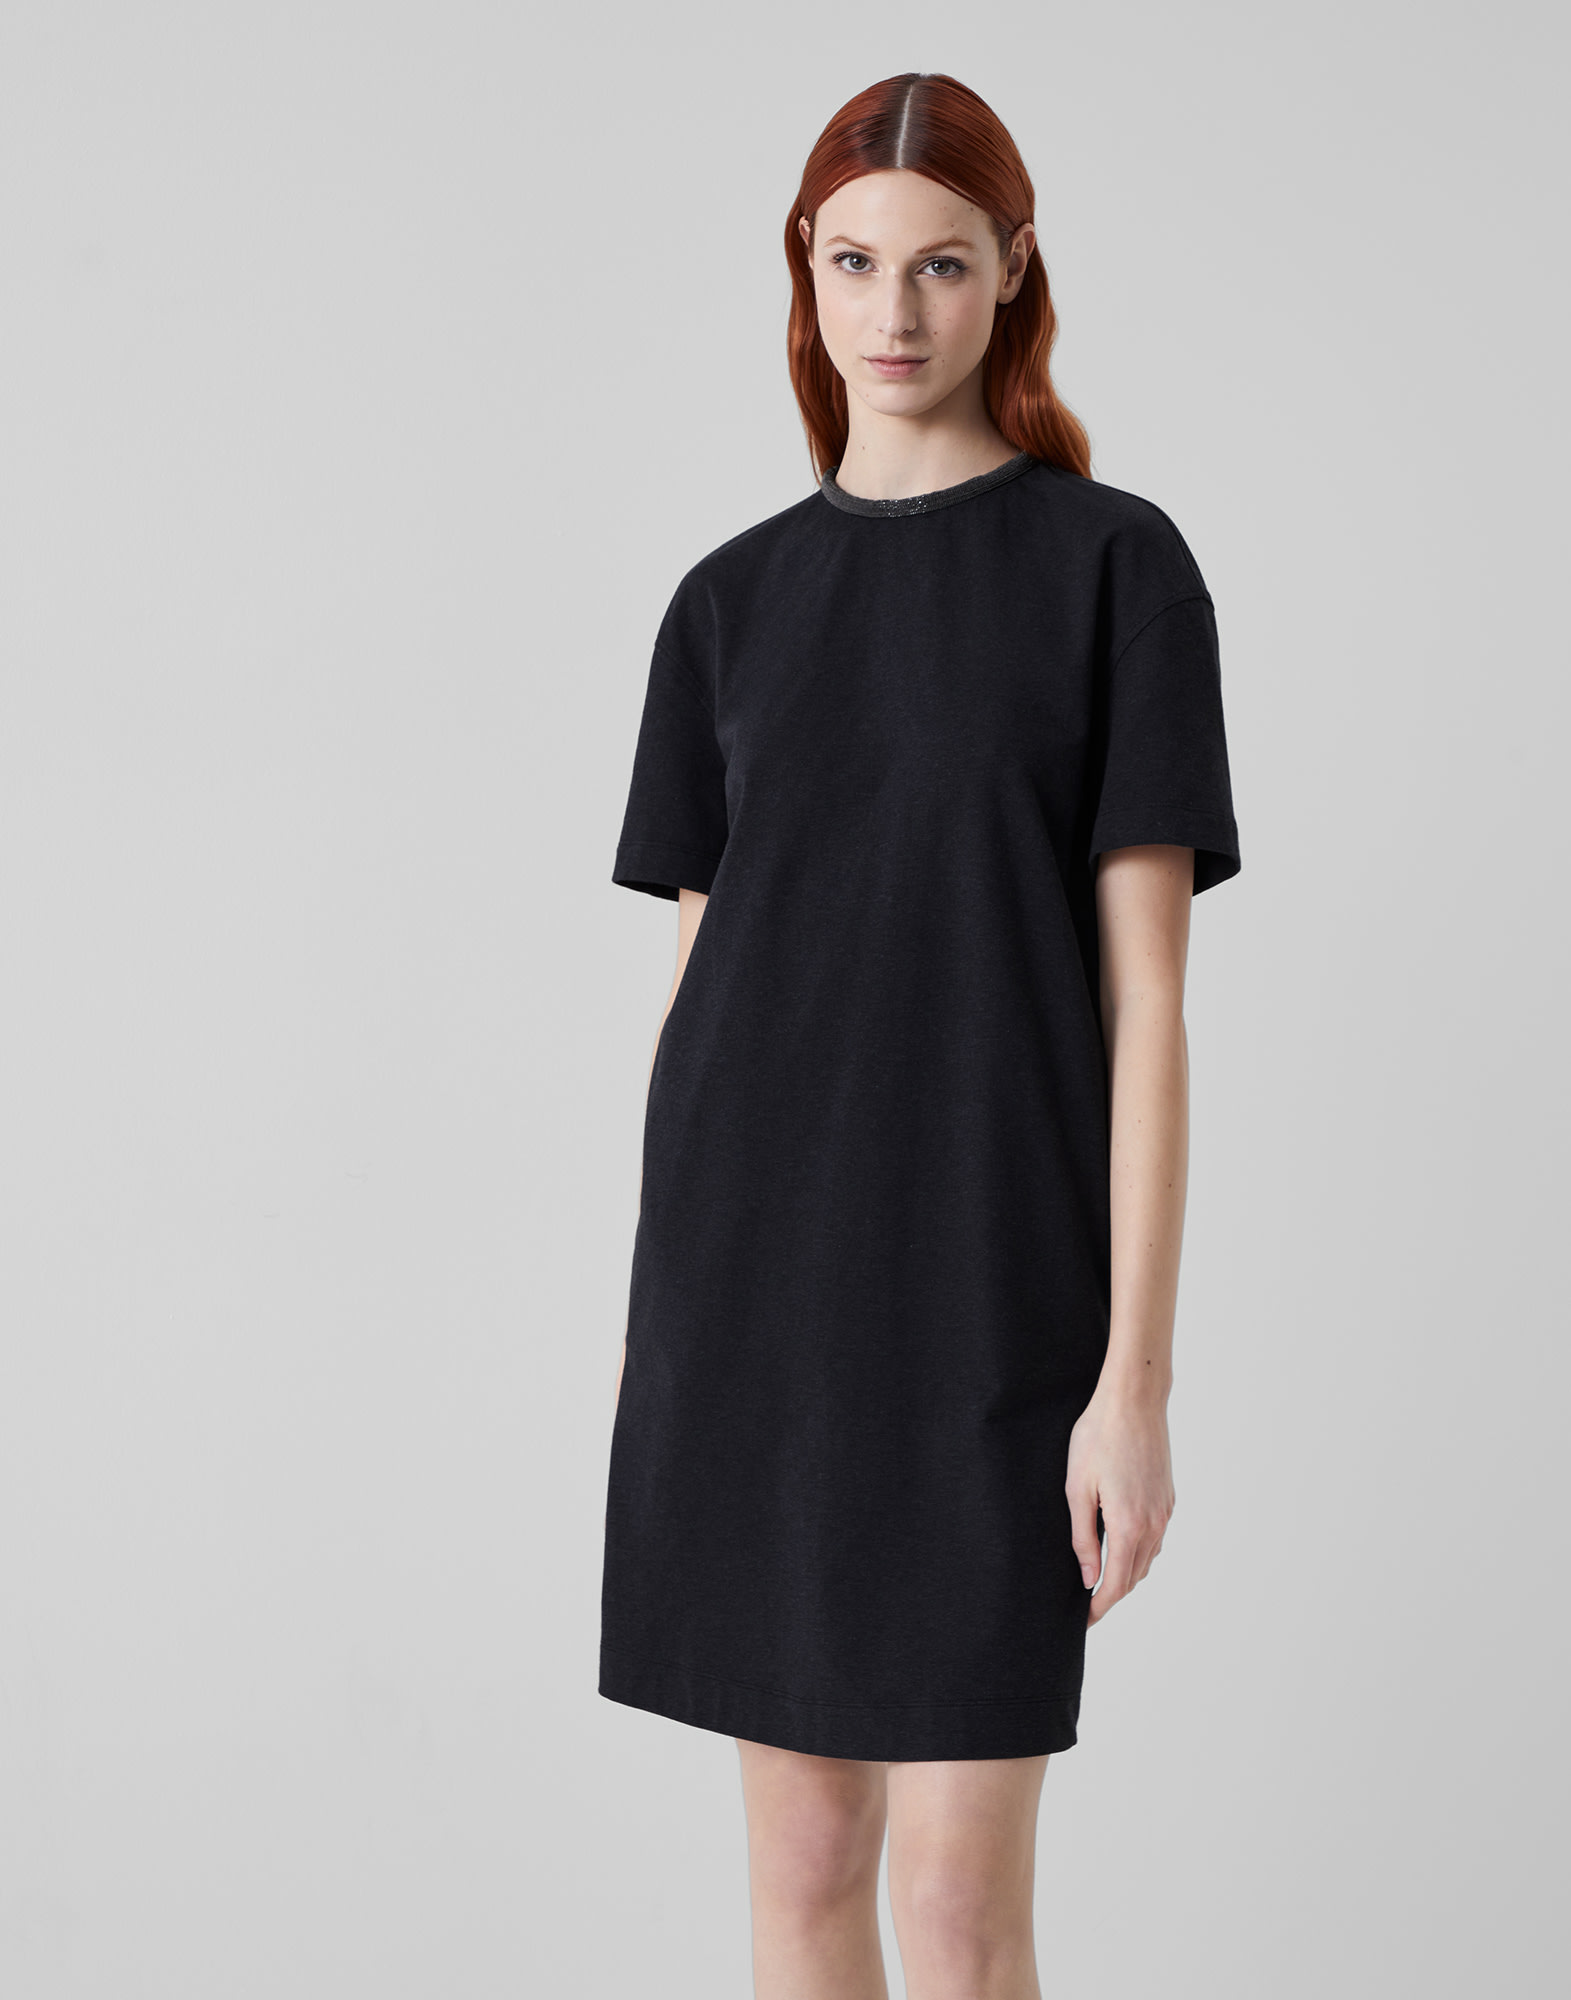 French terry dress Anthracite Woman -
                        Brunello Cucinelli
                    